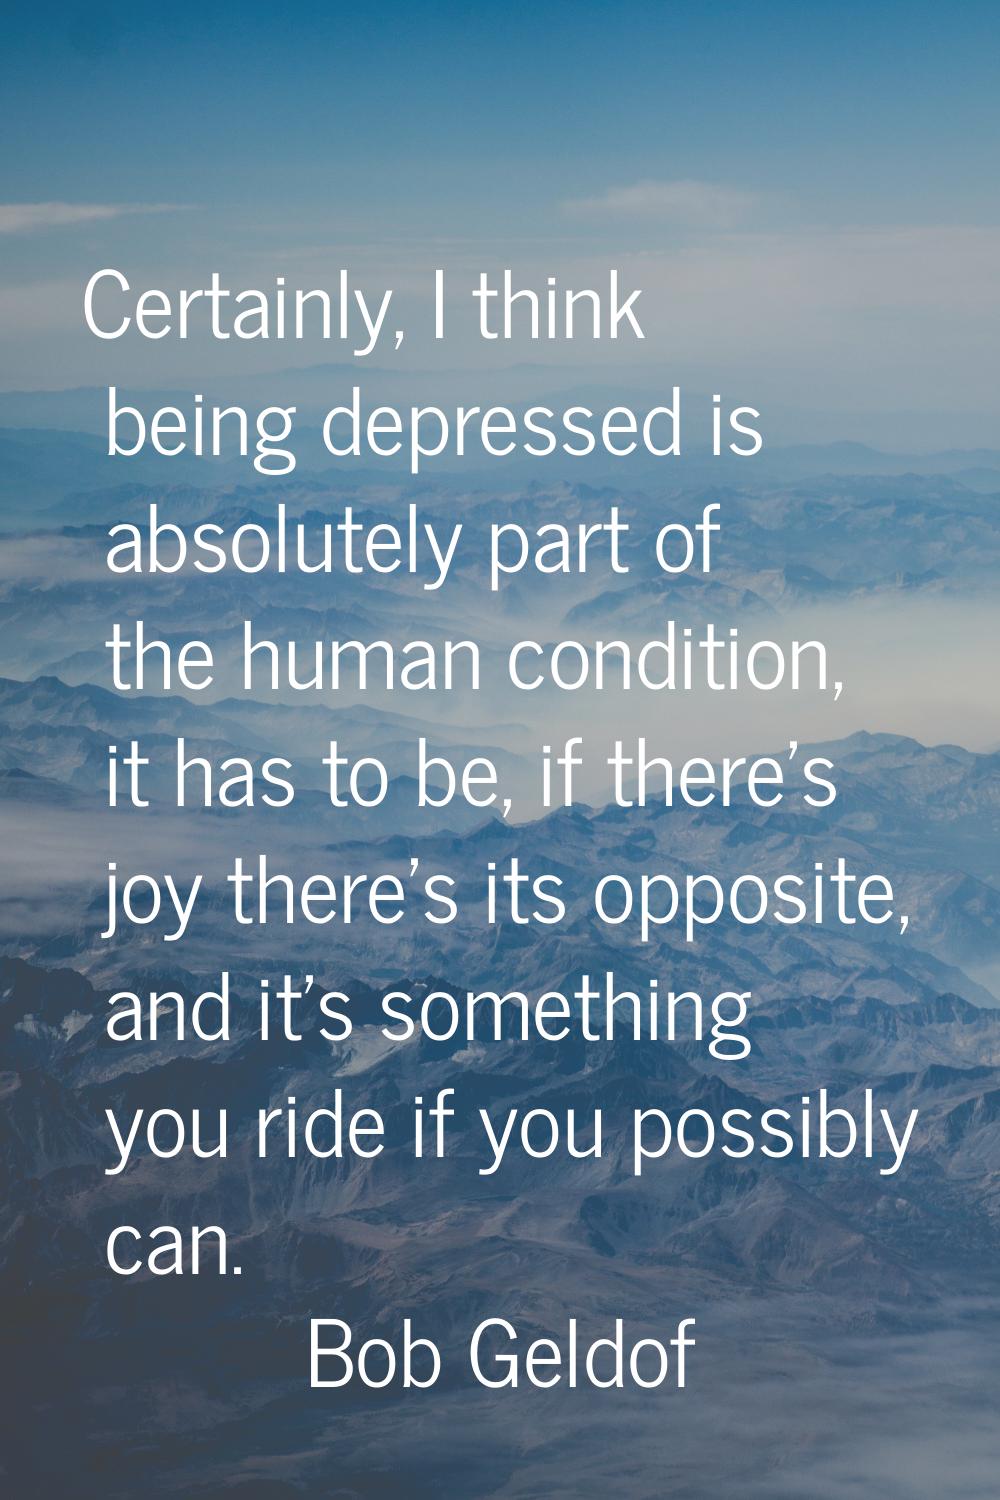 Certainly, I think being depressed is absolutely part of the human condition, it has to be, if ther